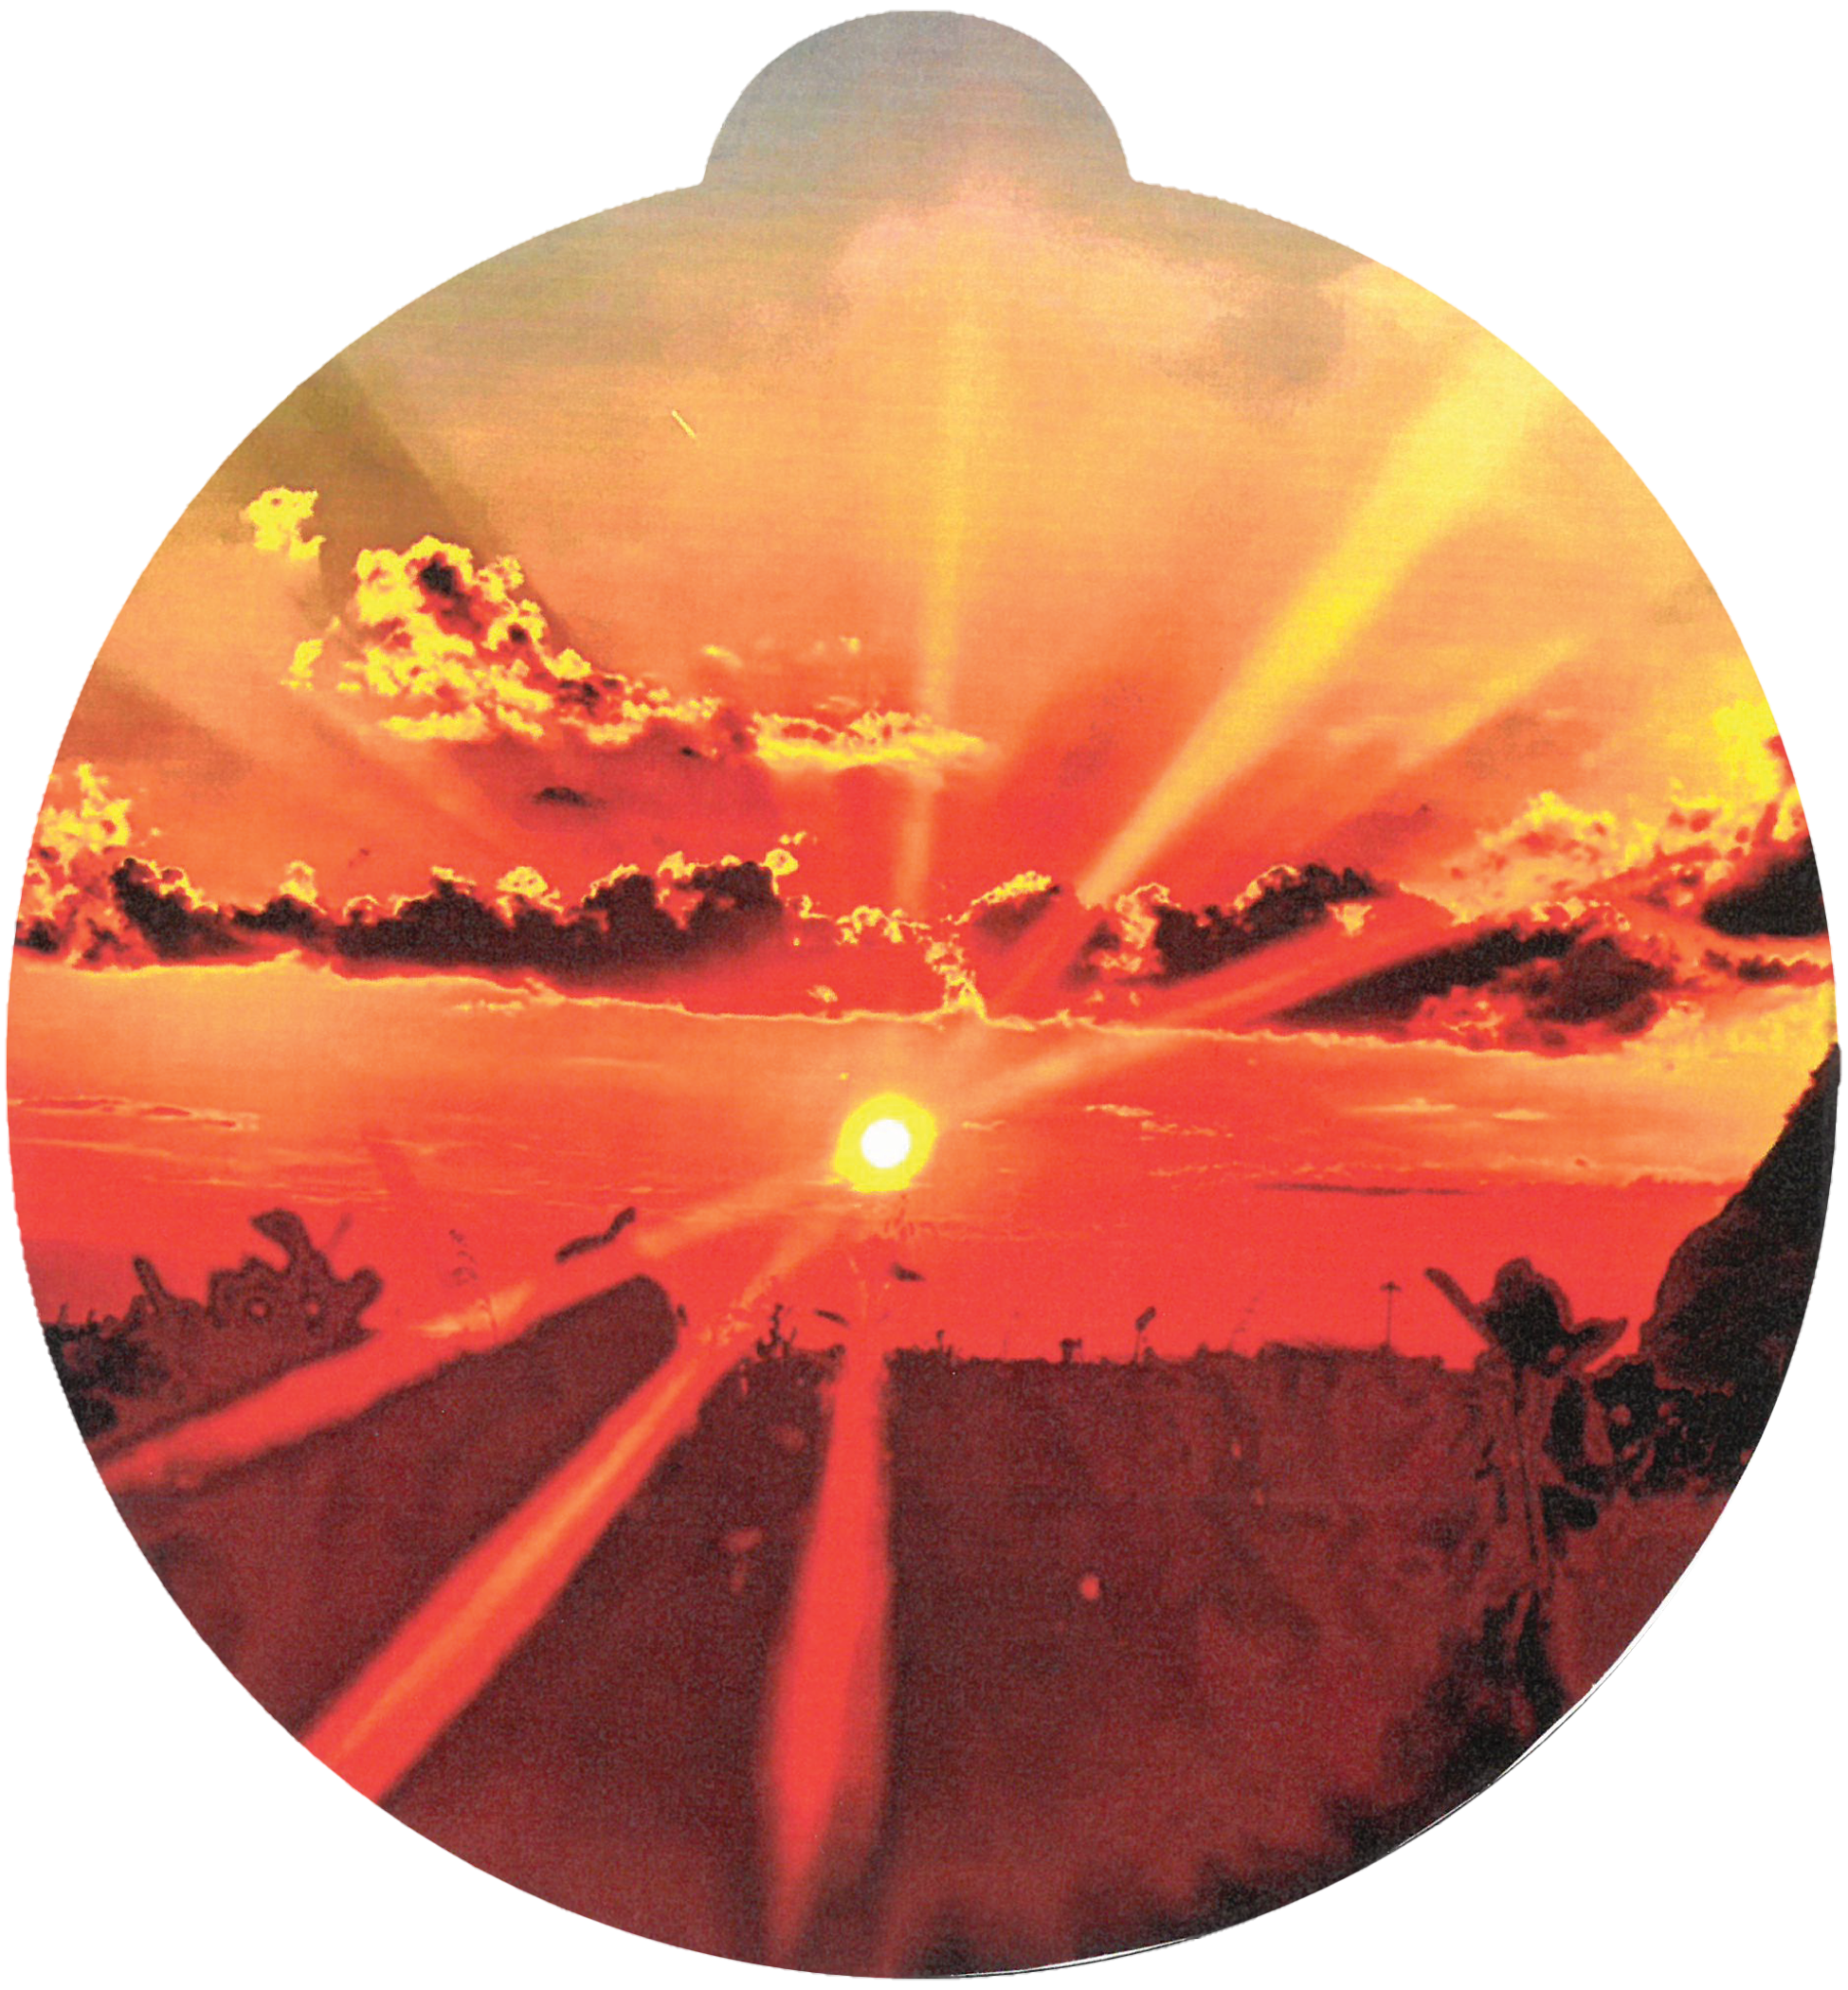 ornament depicting a sunrise over a field